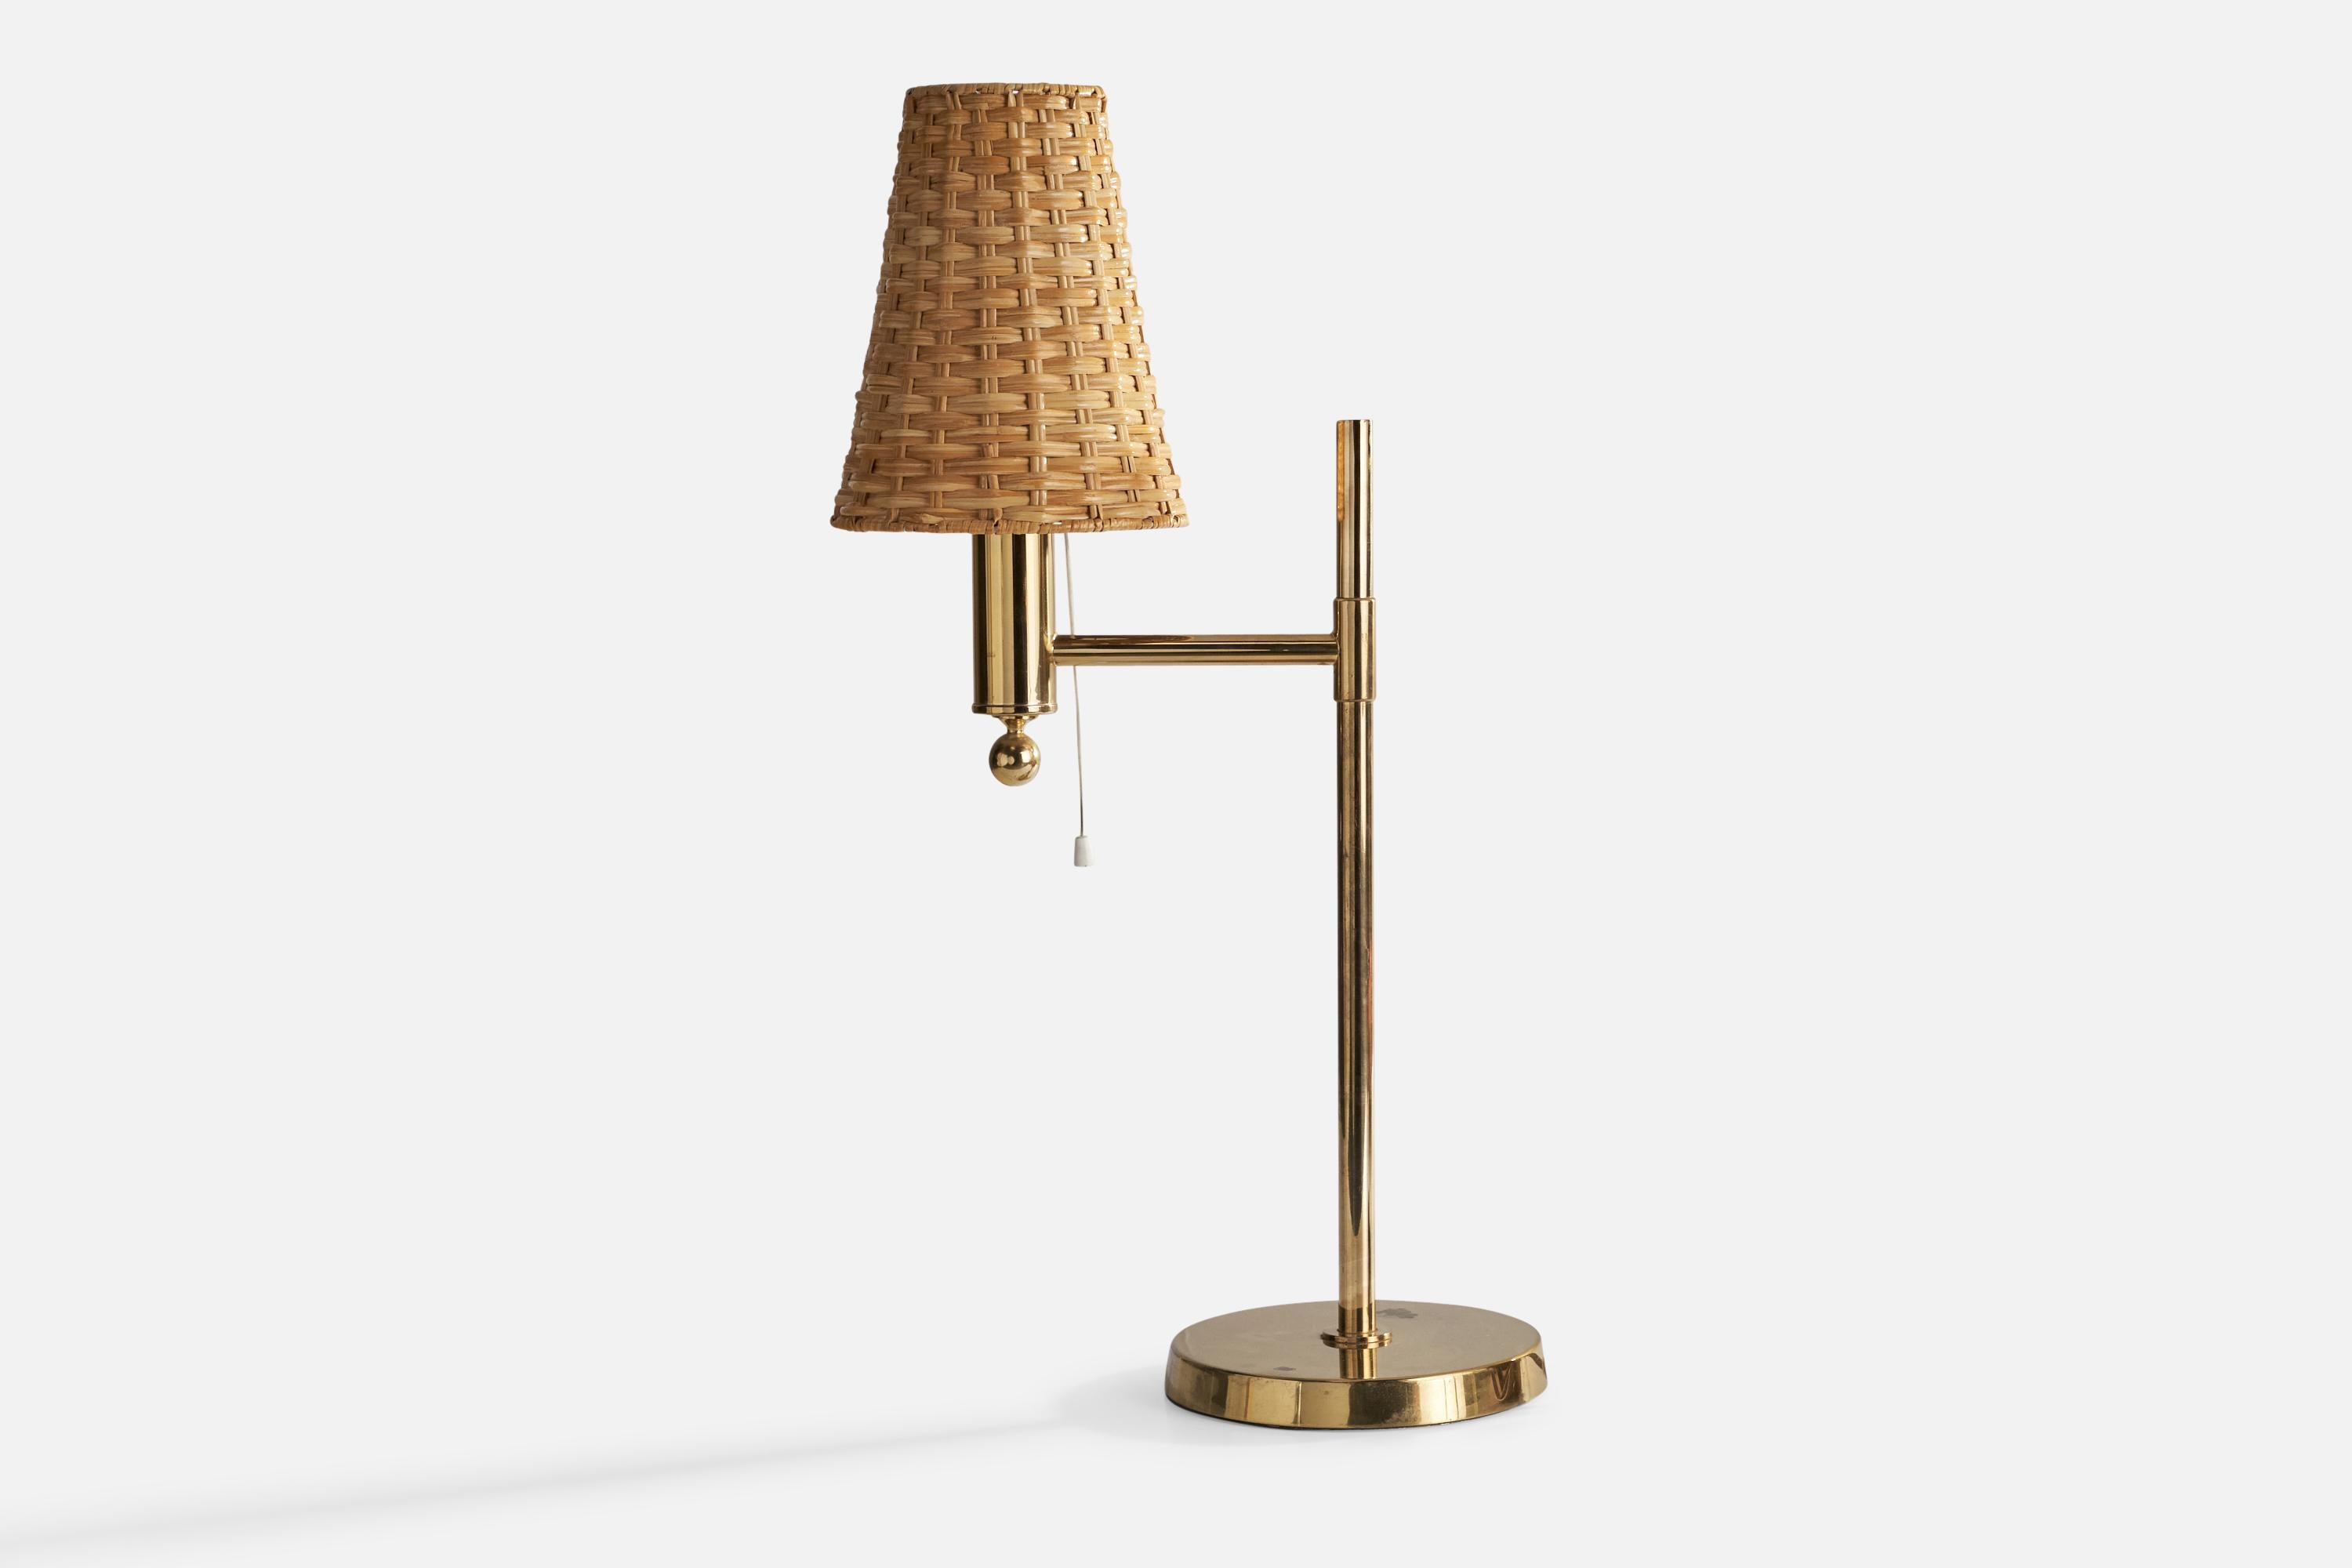 A brass and rattan table lamp designed and produced by Bergboms, Sweden, c. 1970s.

Overall Dimensions (inches): 19.25”  H x 7.25” W x 8” D
Stated dimensions include shade.
Bulb Specifications: E-26 Bulb
Number of Sockets: 1
All lighting will be